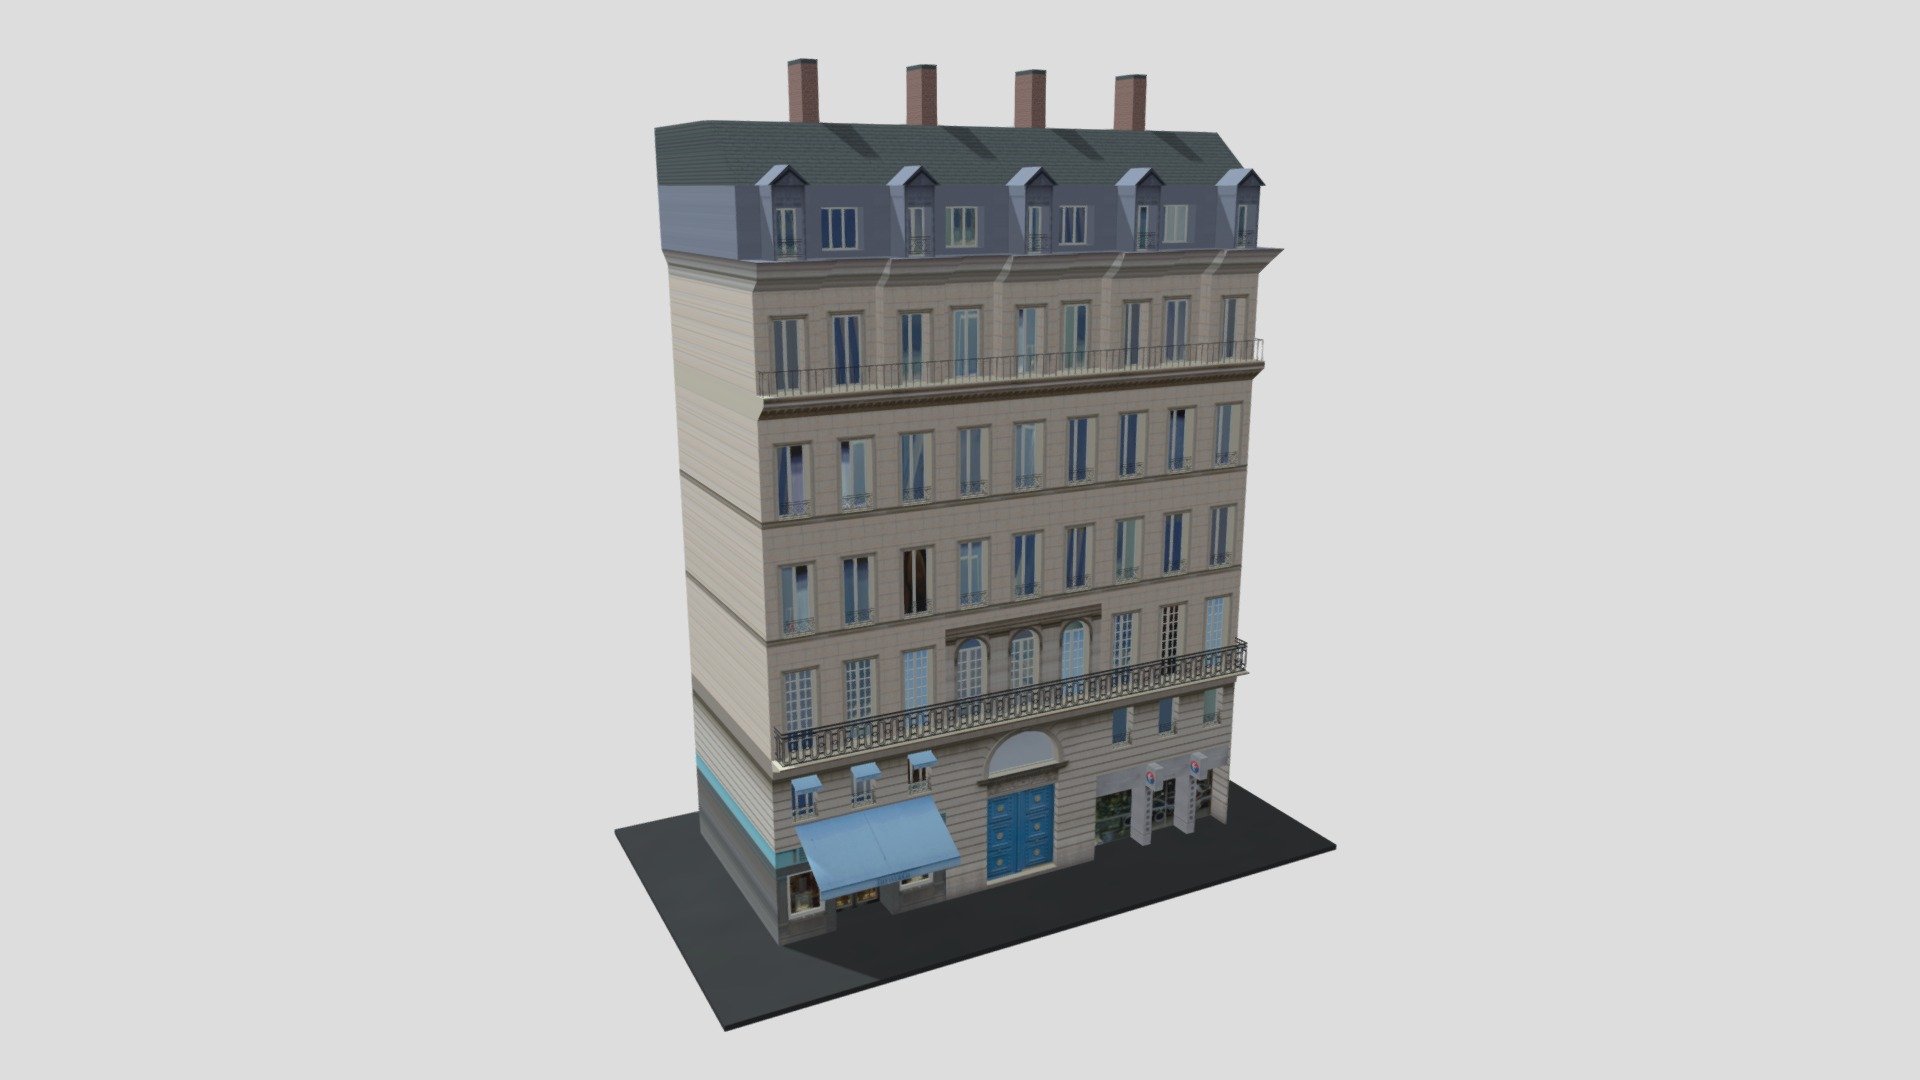 Typical  Paris Apartment Building 13
Originally created with 3ds Max 2015 and rendered in V-Ray 3.0. 

Total Poly Counts:
Poly Count = 89755
Vertex Count = 93626

https://nuralam3d.blogspot.com/2021/08/typical-paris-apartment-building-13.html - Typical  Paris Apartment Building 13 - 3D model by nuralam018 3d model